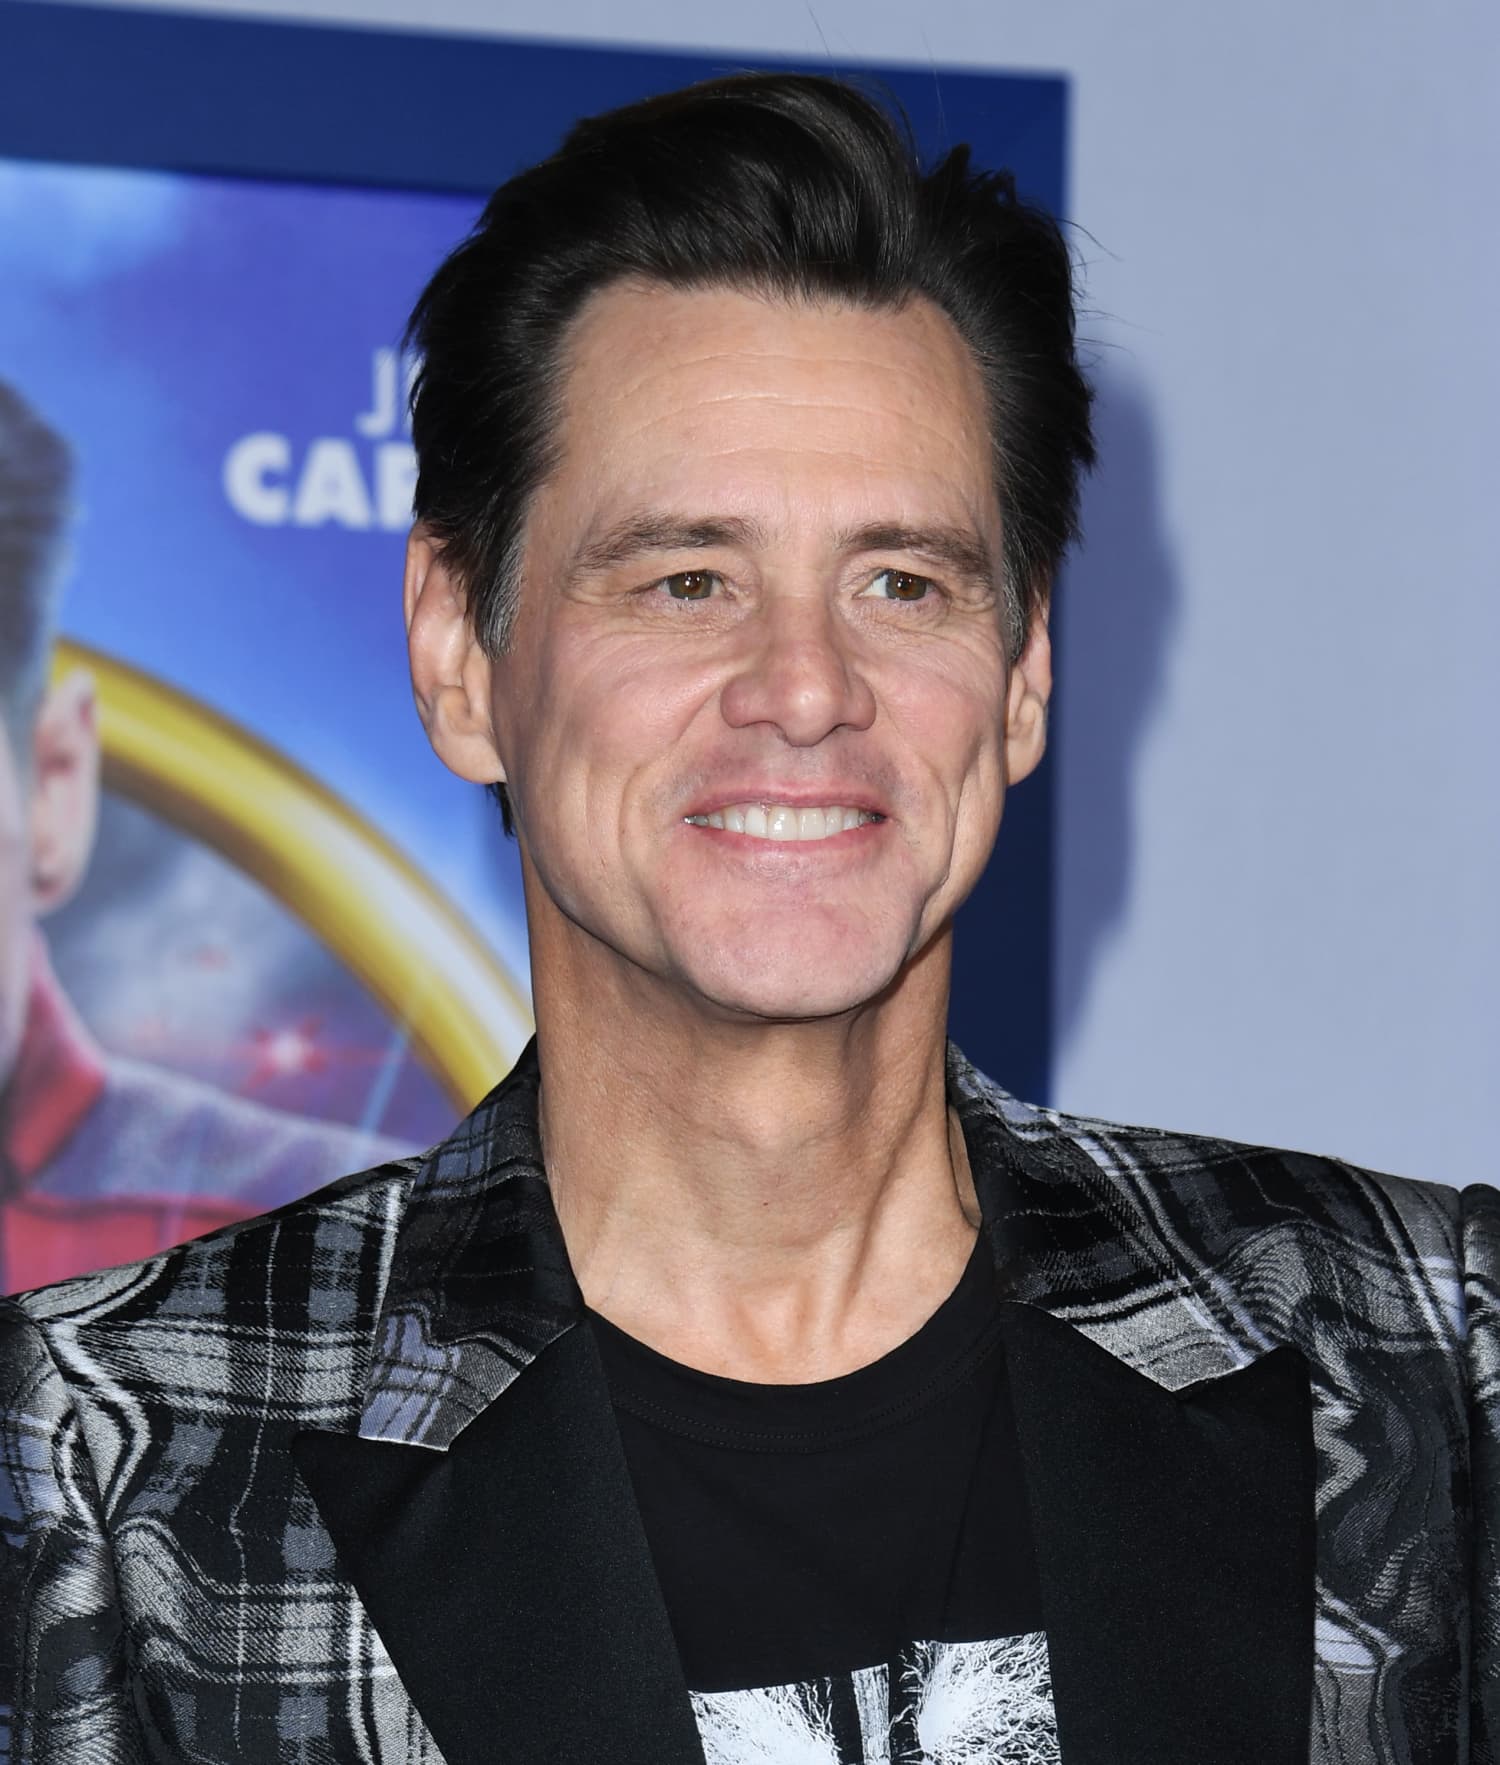 Jim Carrey’s Sprawling Los Angeles Mansion Is Up for Sale and the Kitchen Is Smokin’